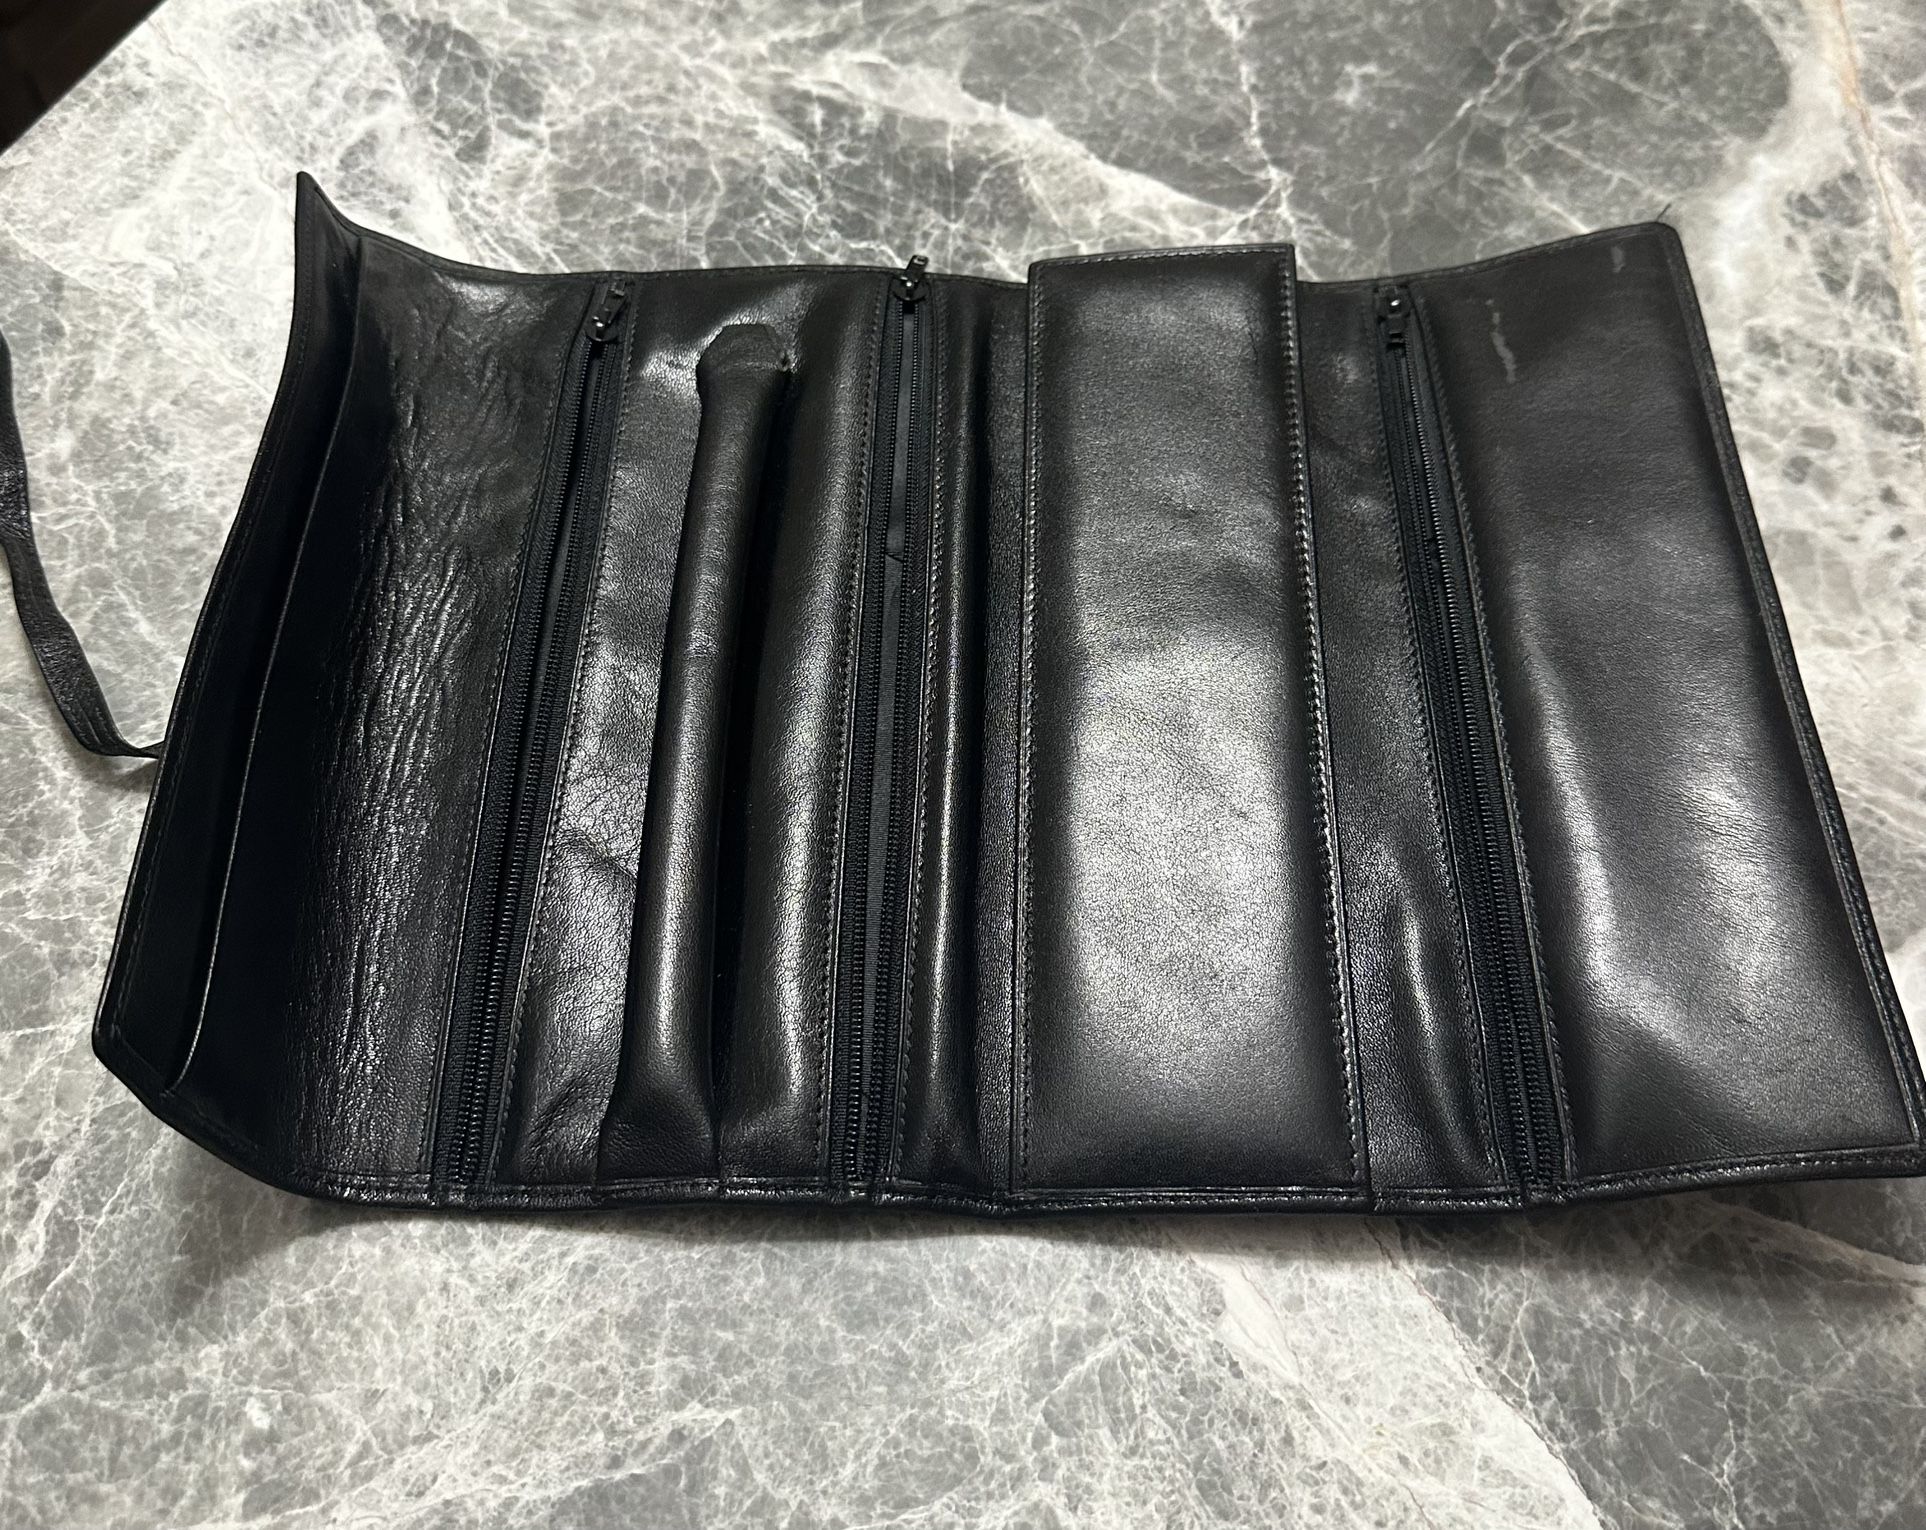 SOLD‼️ Authentic Elysee wallet clutch